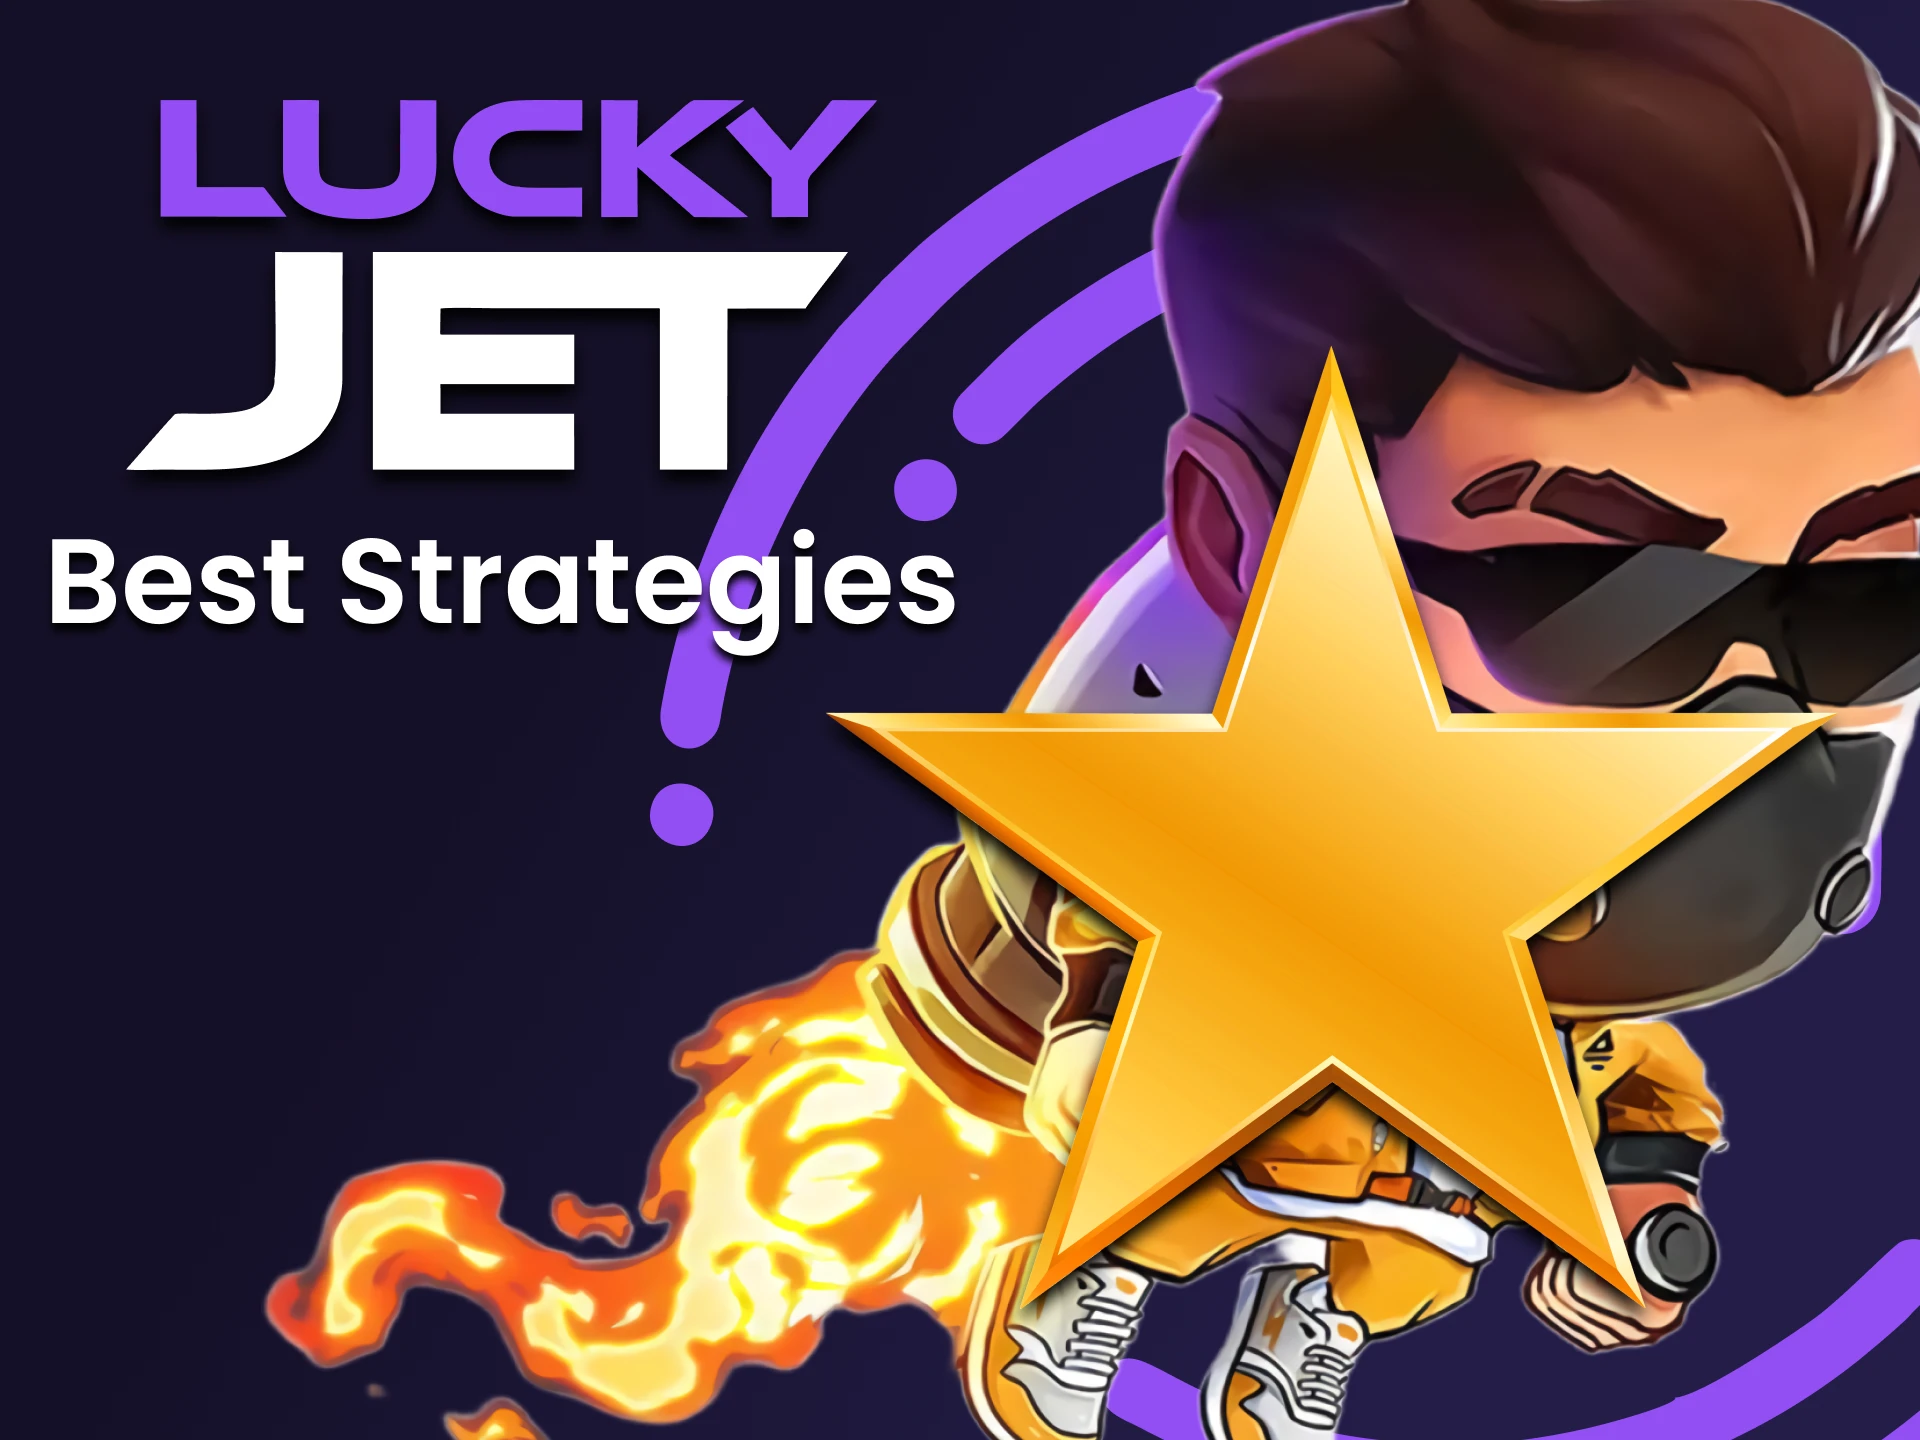 We will tell you about the best strategies in the game Lucky Jet.